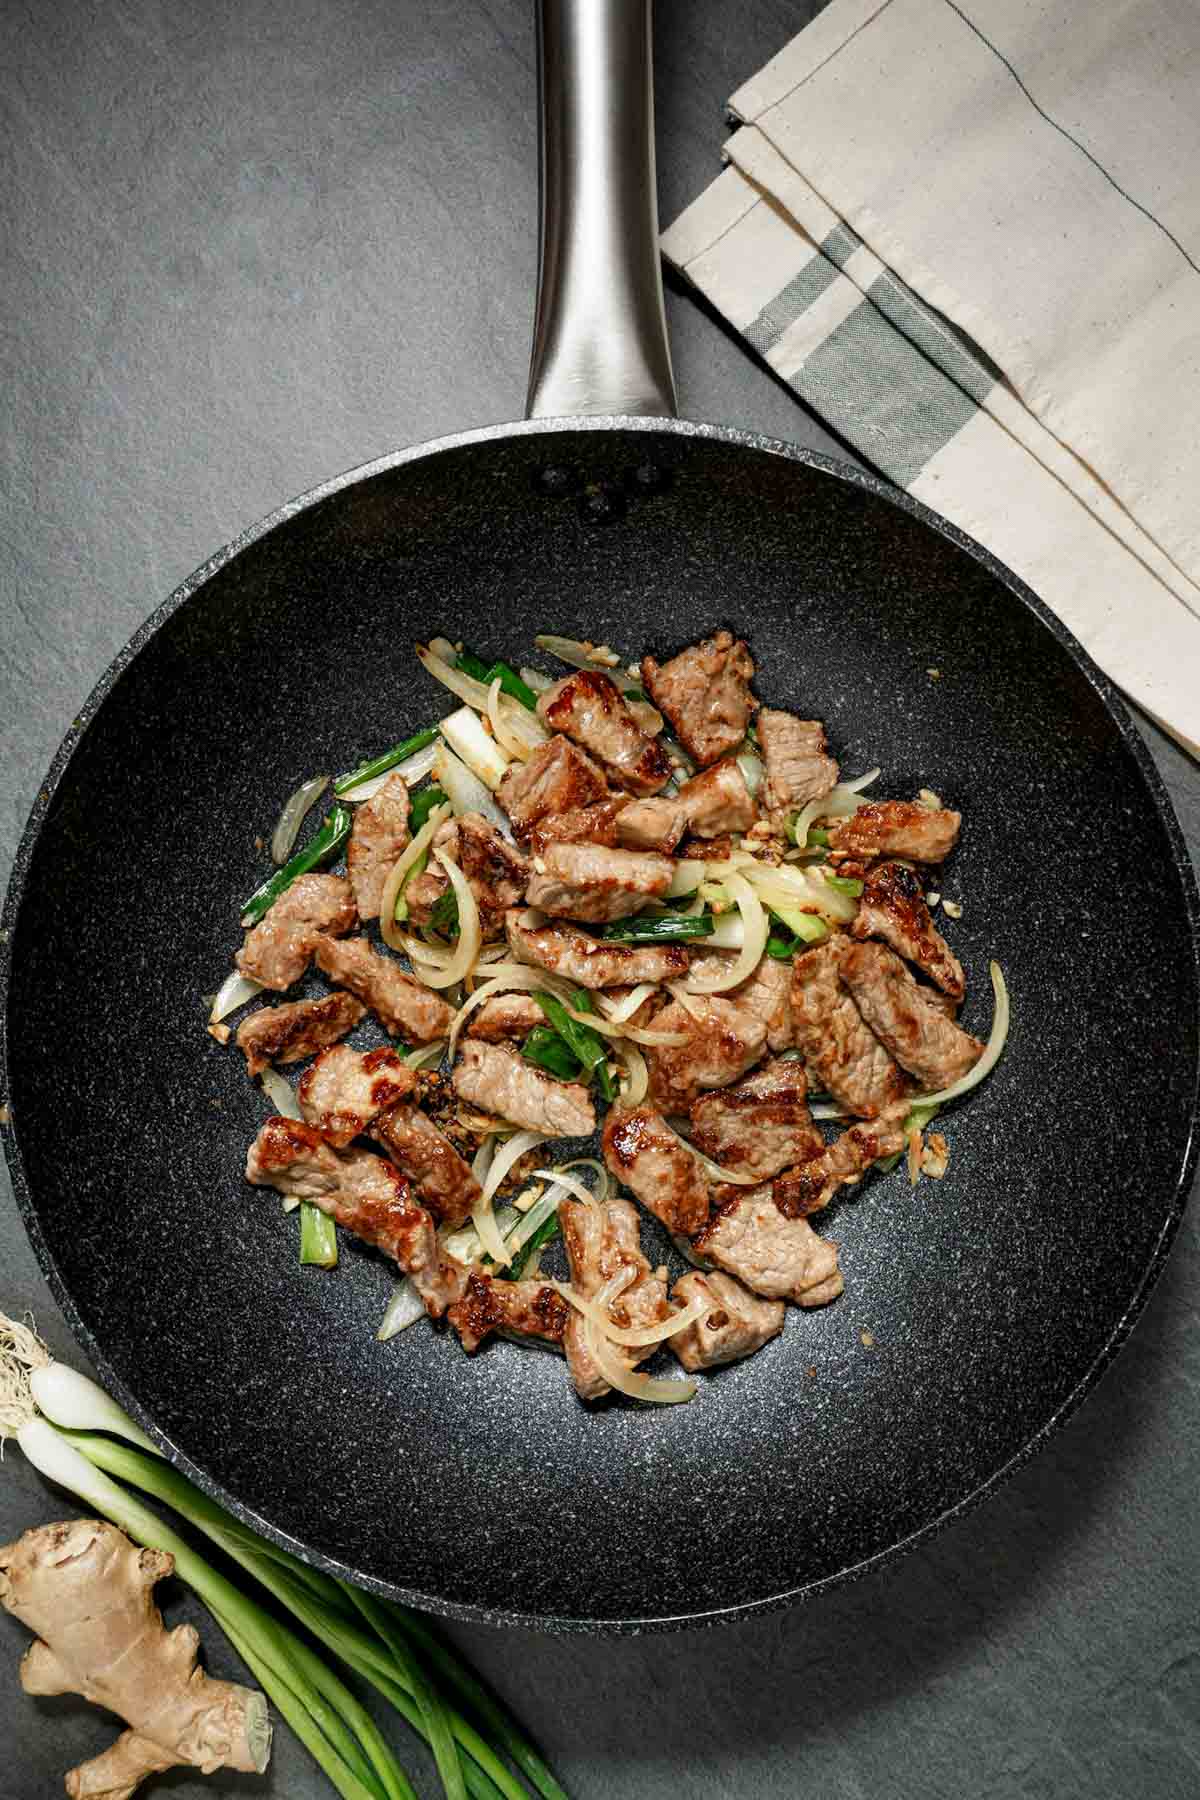 slices of meat, onions and green onions cooking in a skillet